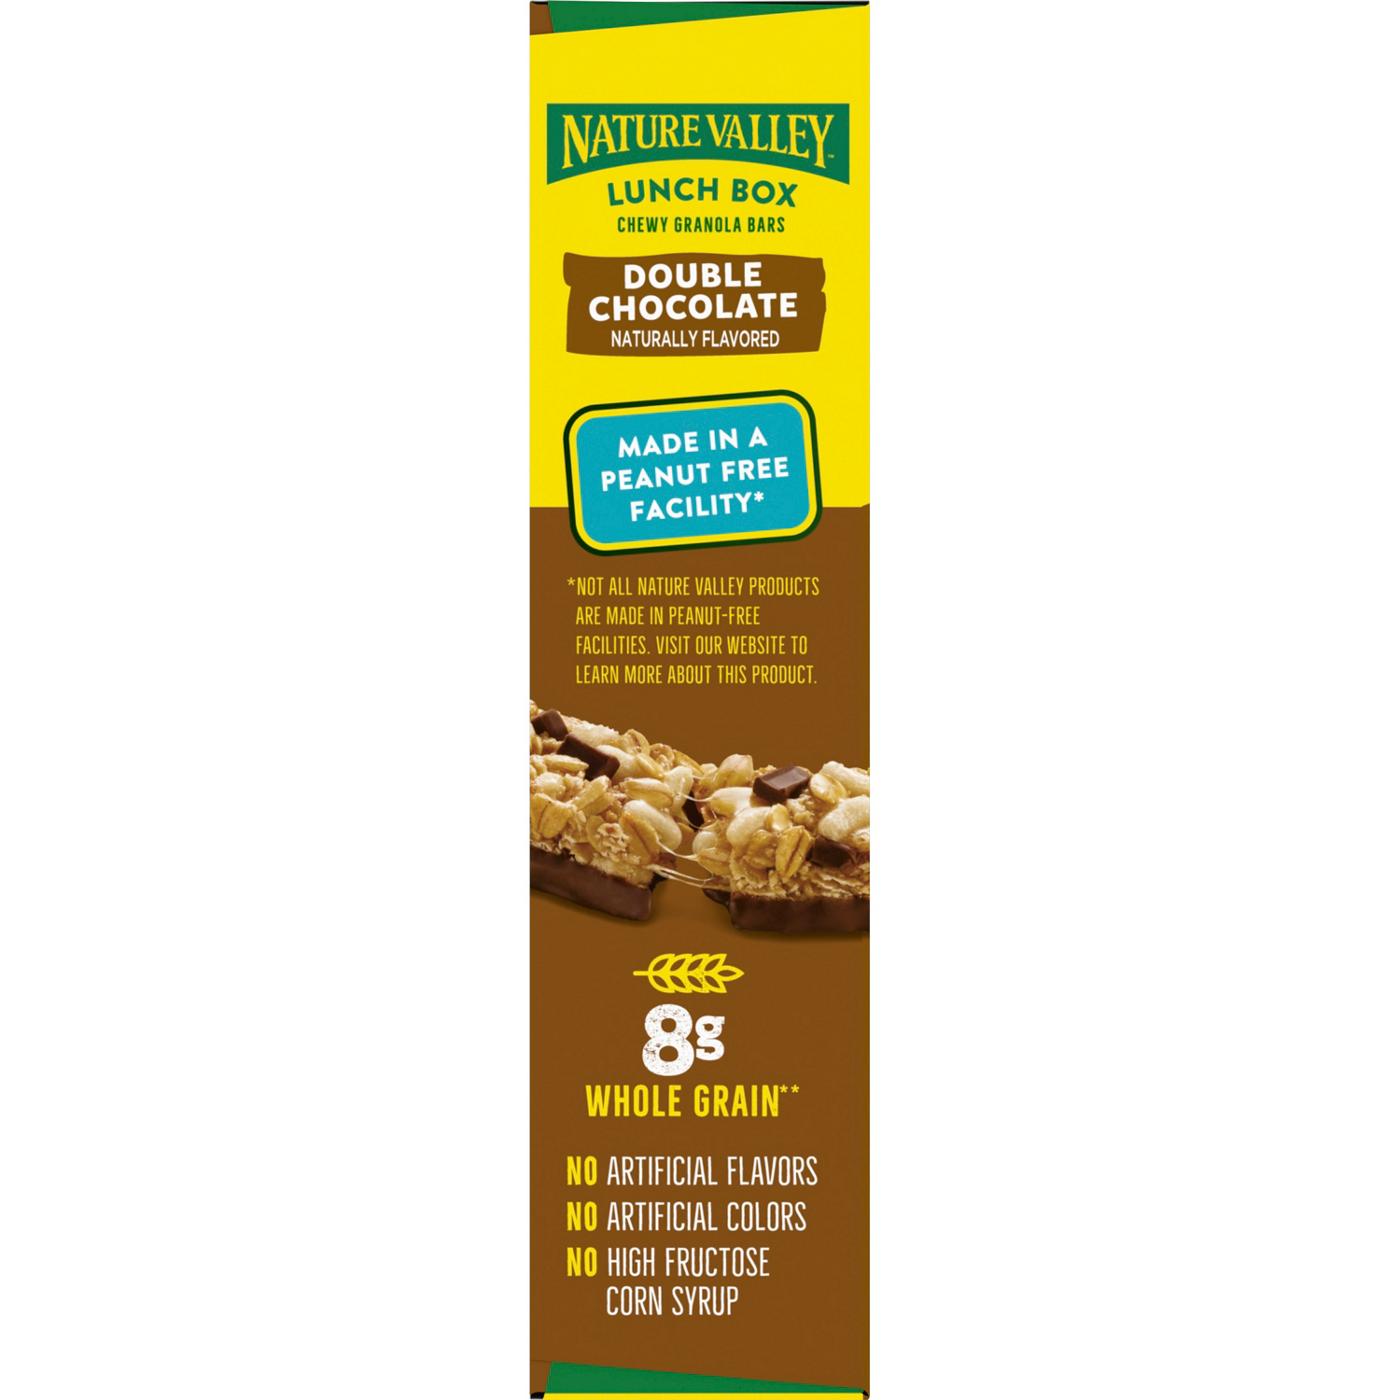 Nature Valley Lunch Box Double Chocolate Chewy Granola Bars; image 3 of 3